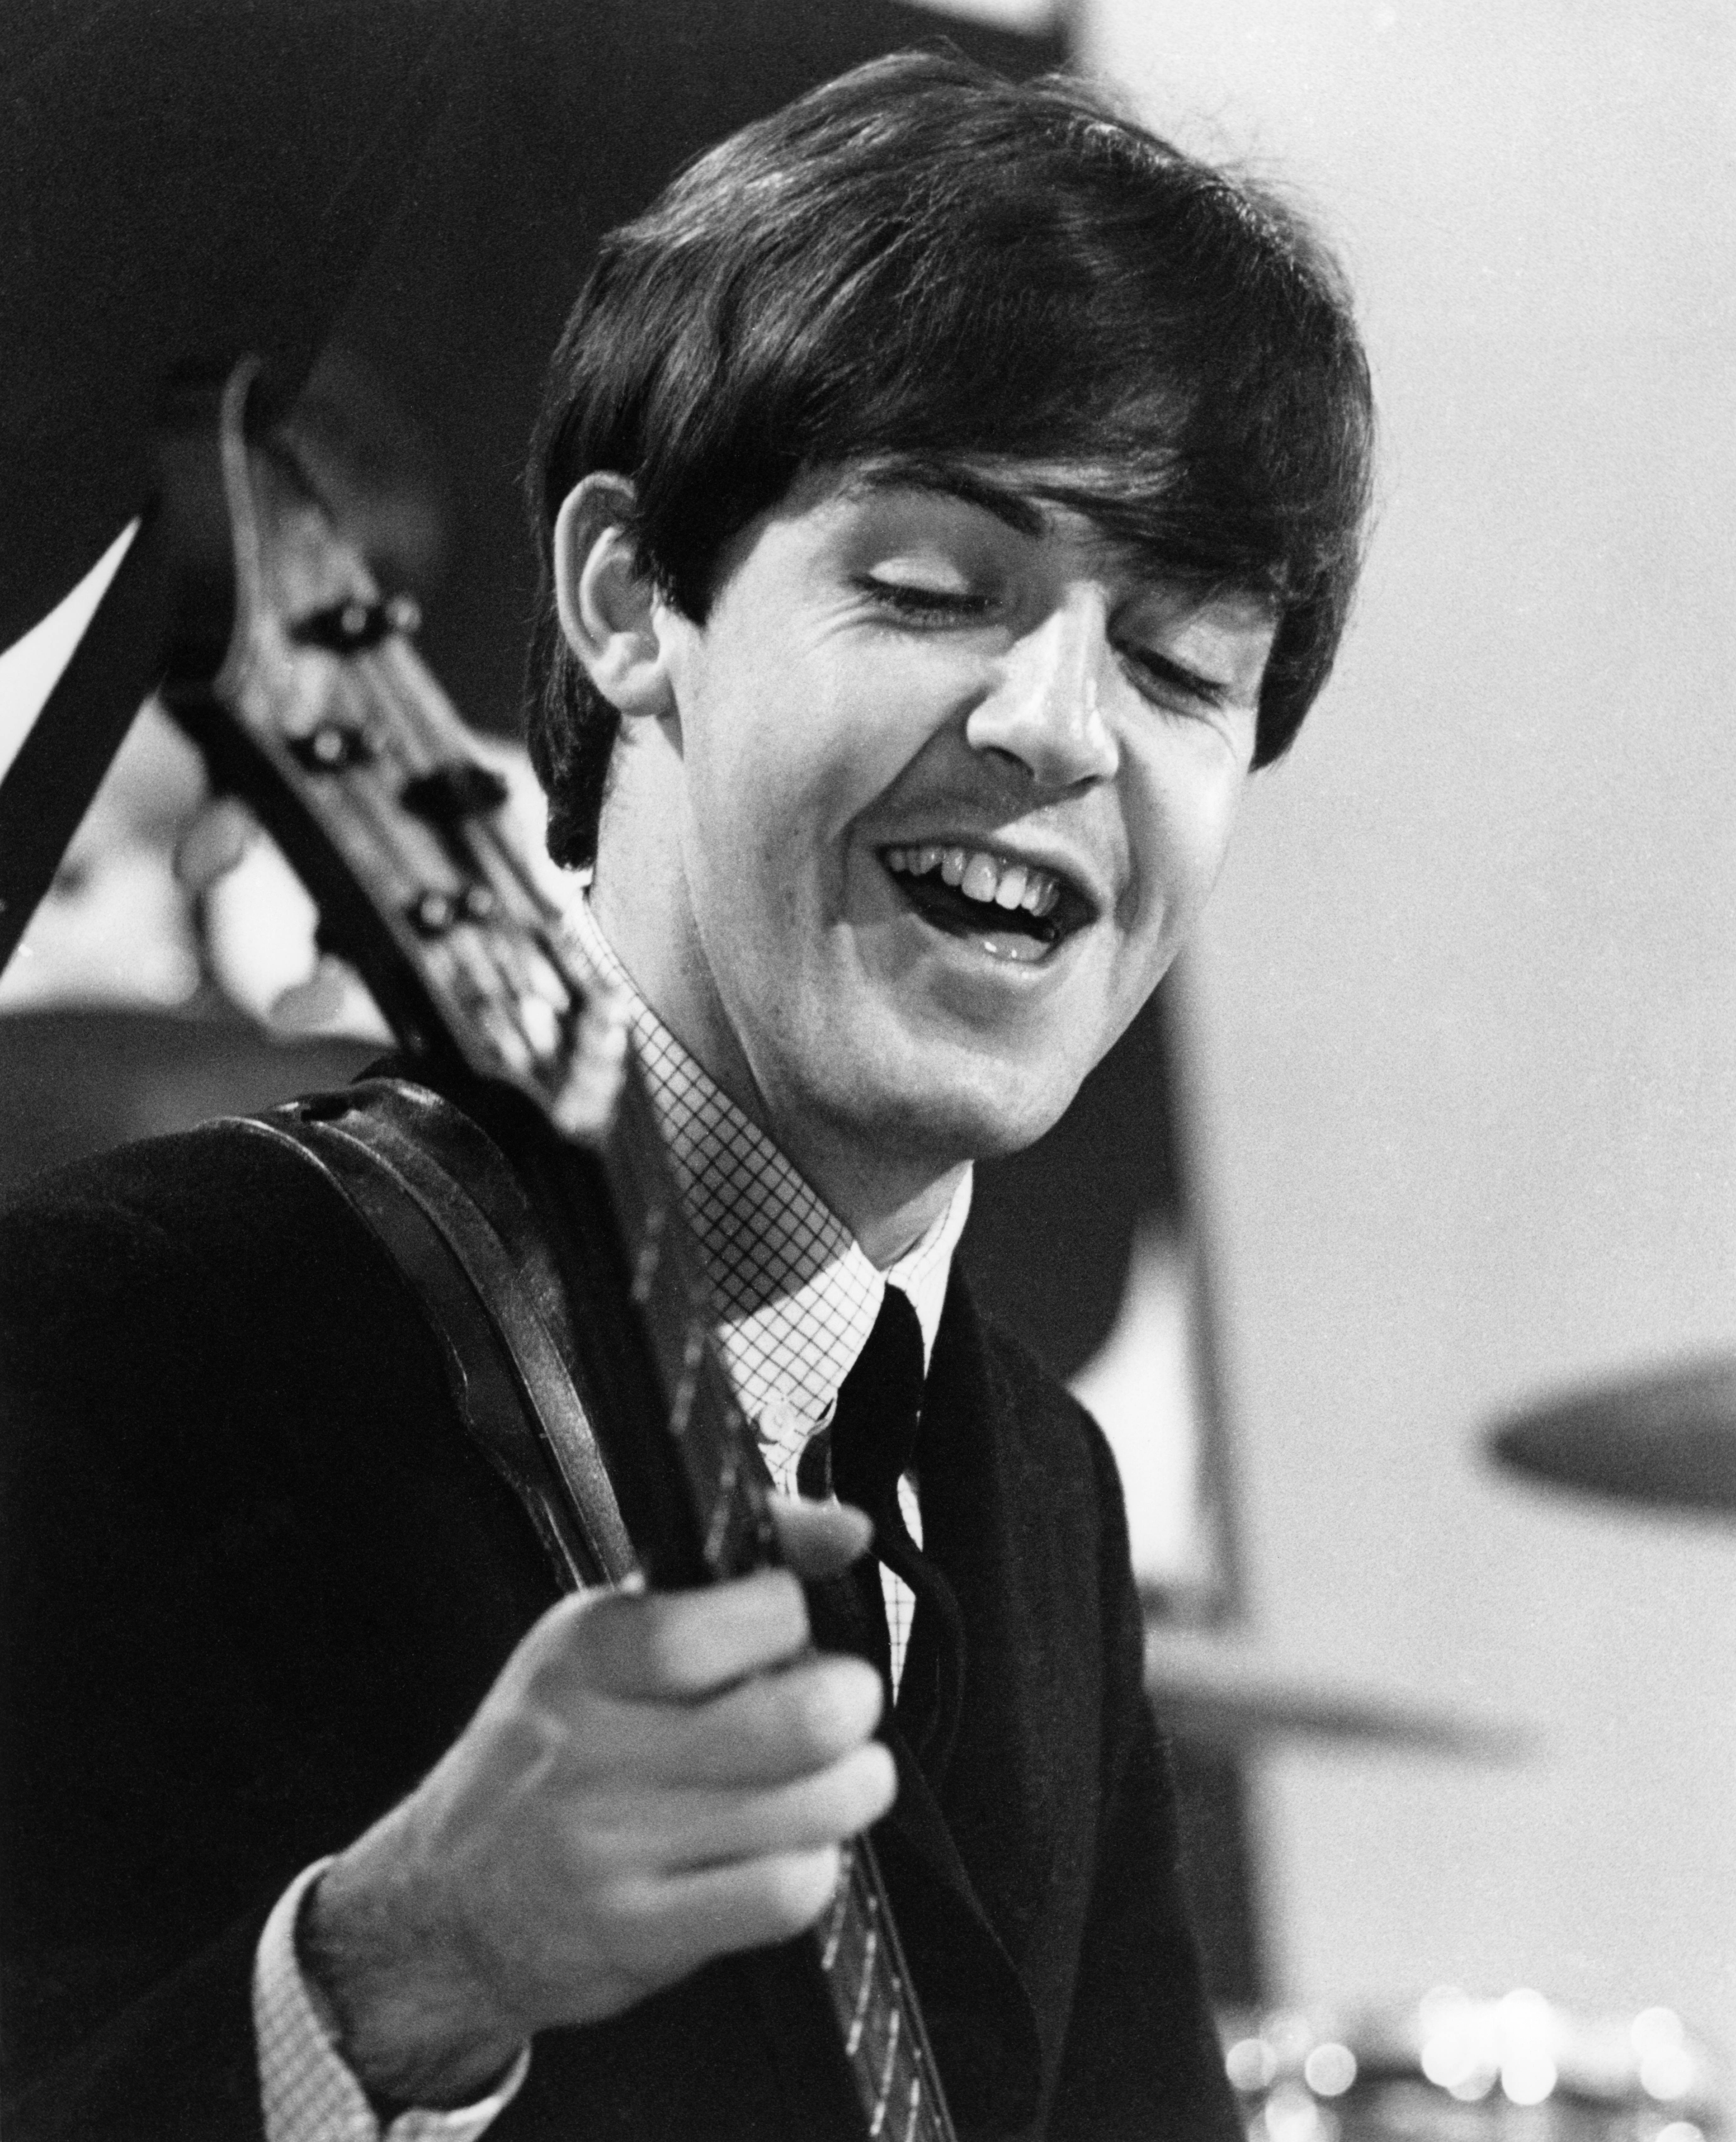 Paul McCartney, of the Beatles, performing at Alpha Television Studios, Aston, Birmingham on December 15, 1963. | Source: Getty Images